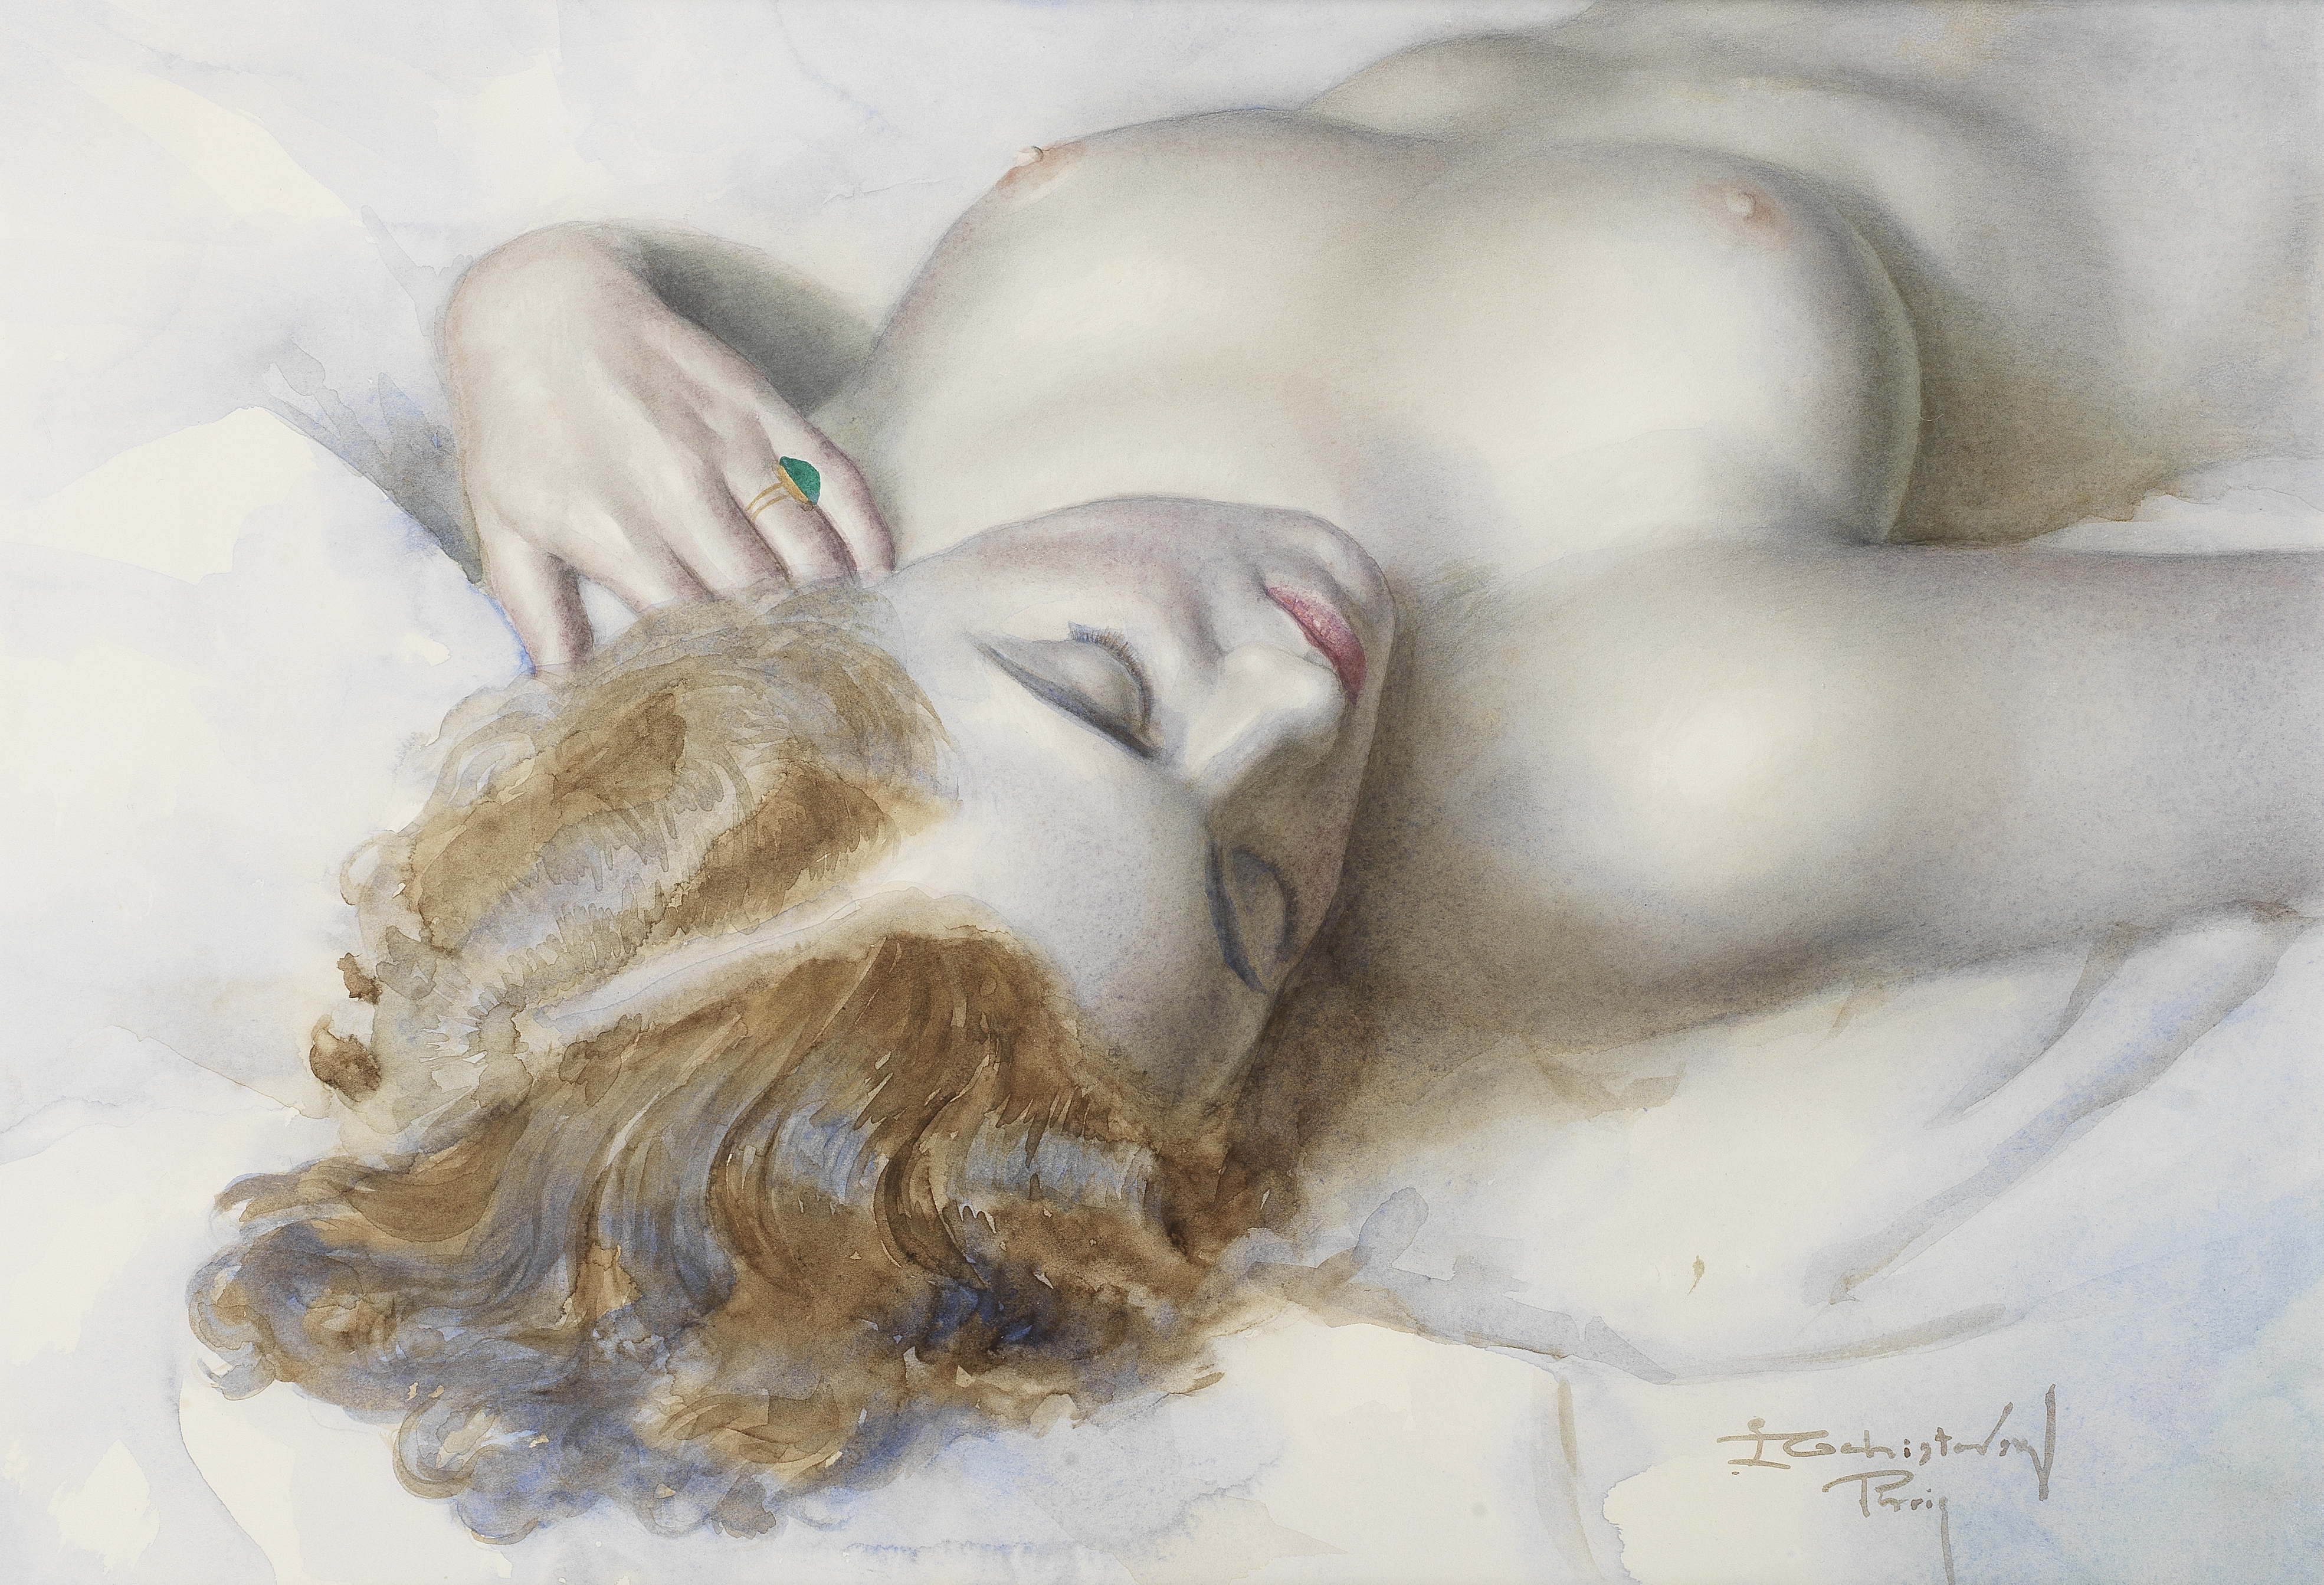 Lev Tchistovsky (Russian, 1902-1969) Reclining nude